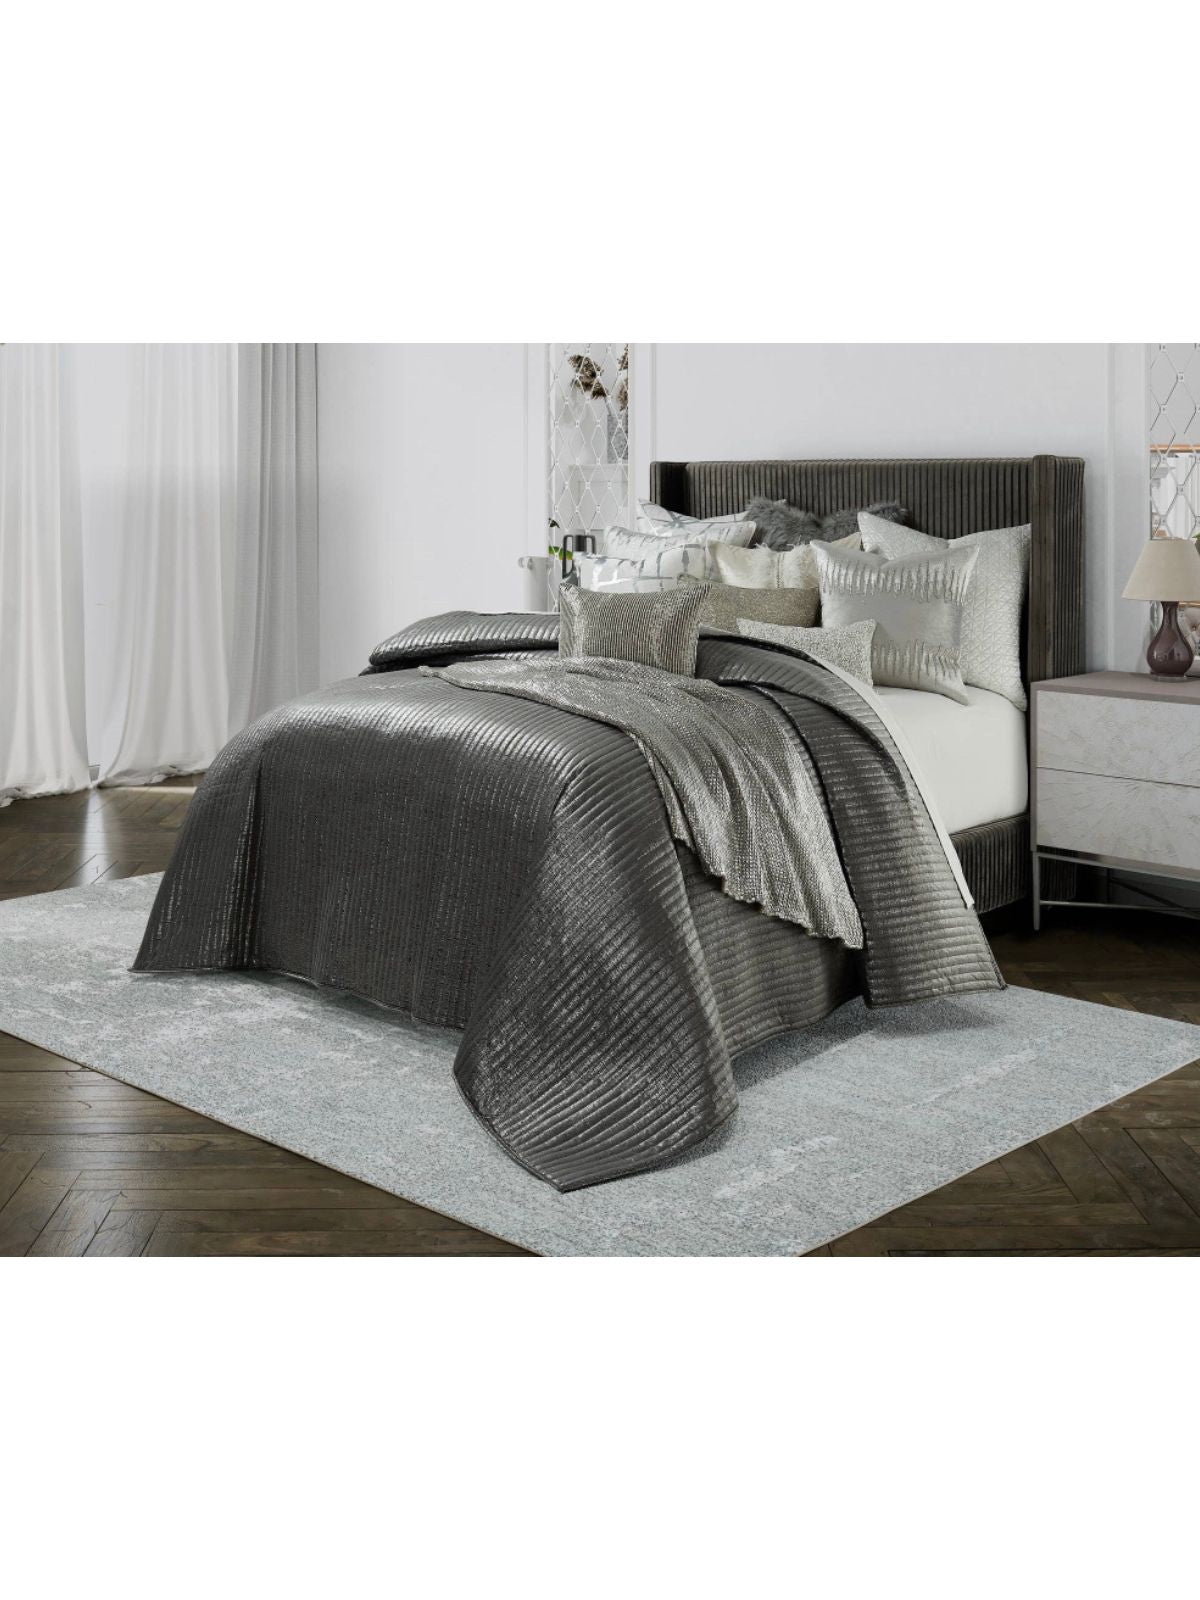 The Maya Dark Grey and Silver velvet quilt has a dominant silvery metal layer. The shiny silver will pair well in any toned-down area.